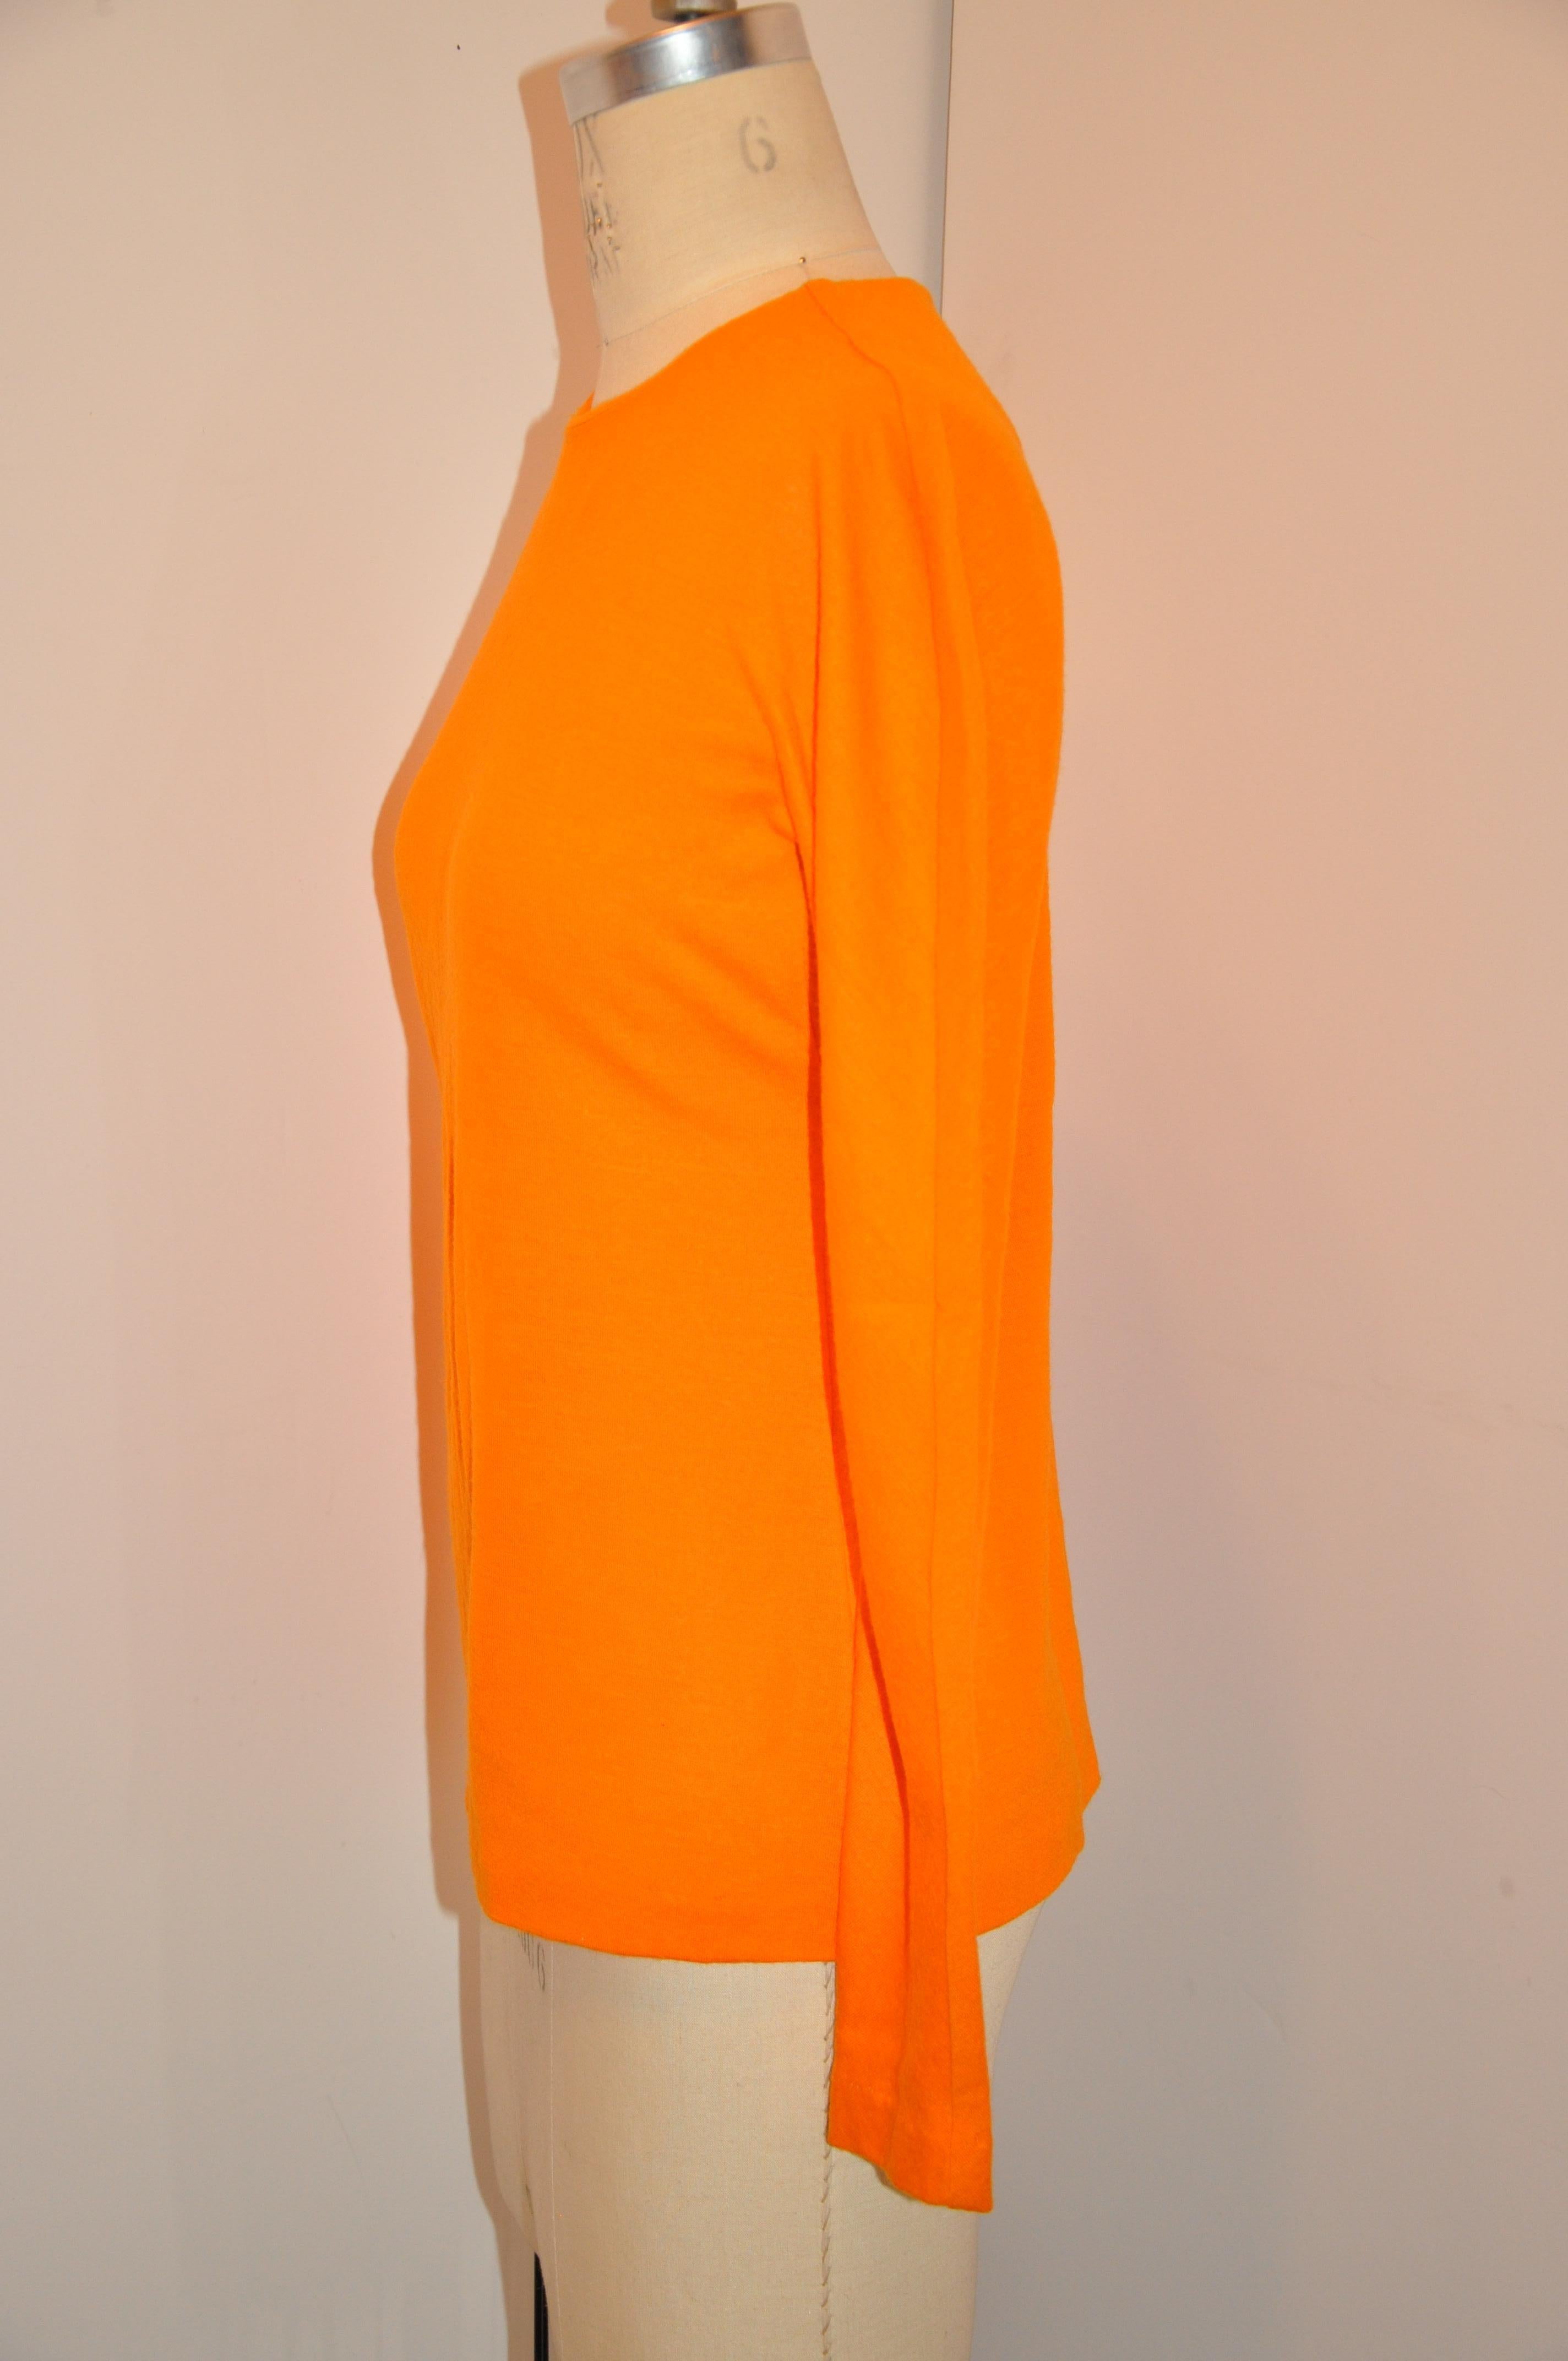 Rare Stephen Sprouse Warm Tangerine Wool Jersey Pullover Top In Good Condition For Sale In New York, NY